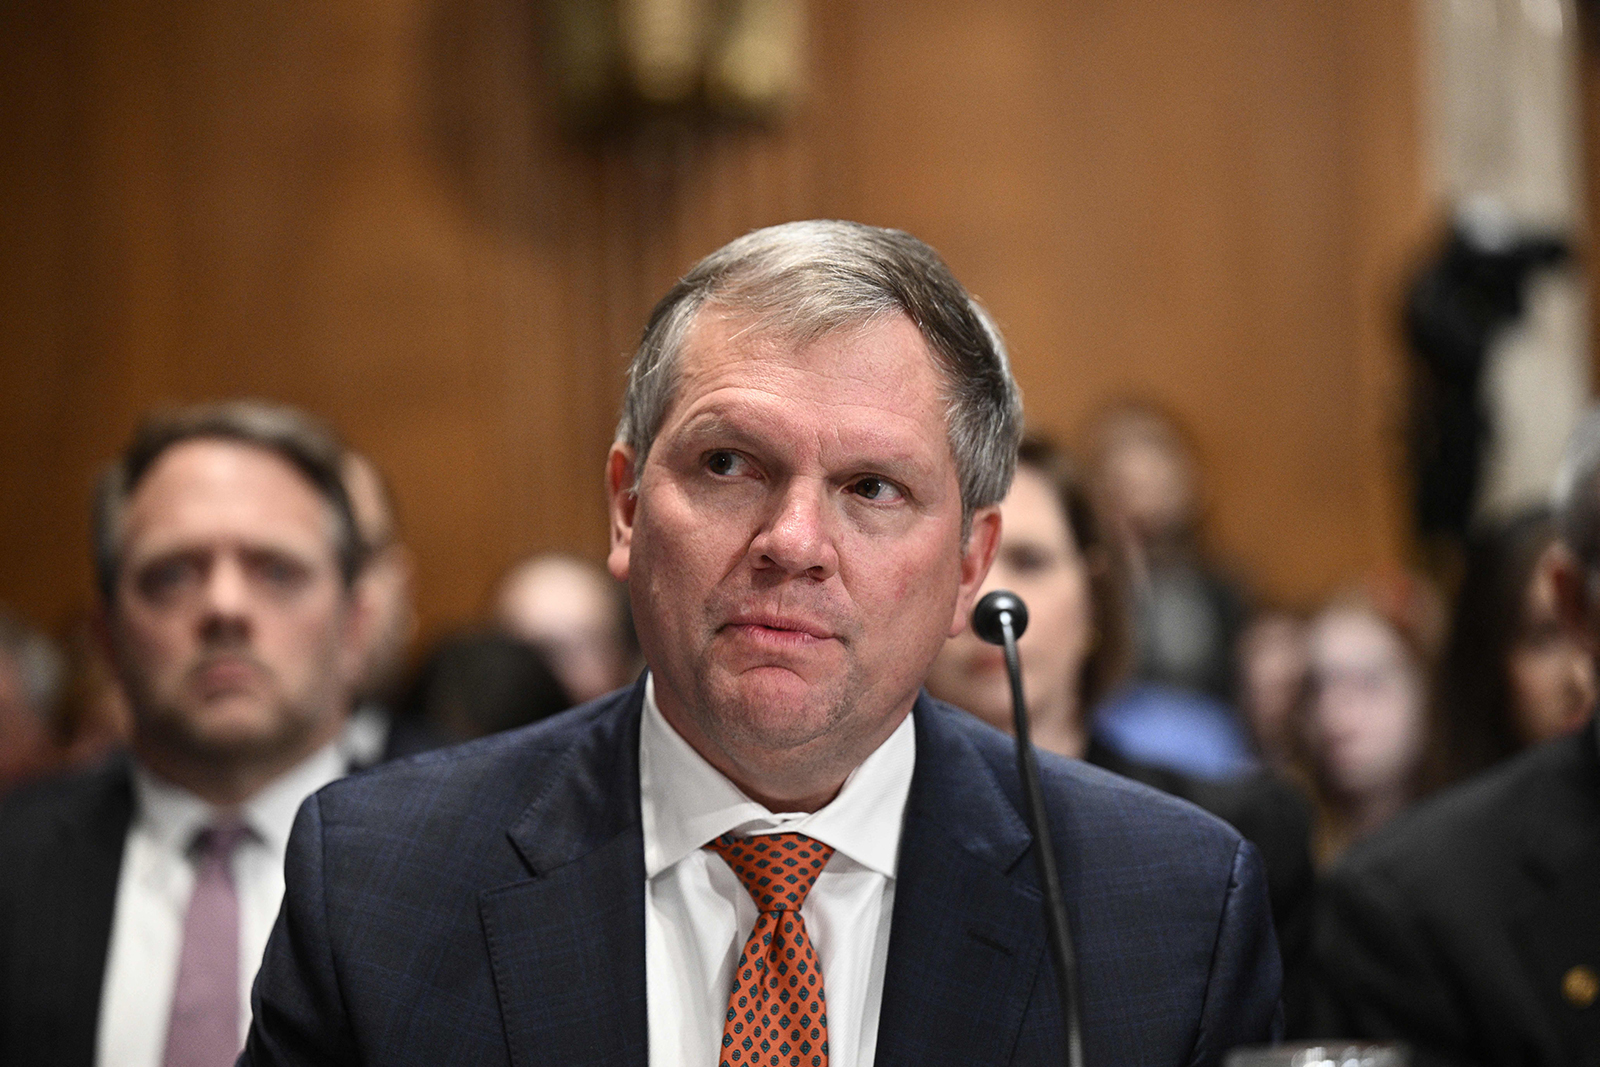 Norfolk Southern Corporation President and CEO, Alan Shaw, testifies today before a US Senate Committee on Environment and Public Works hearing on the environmental and public health threats from the Norfolk Southern February 3 train derailment.